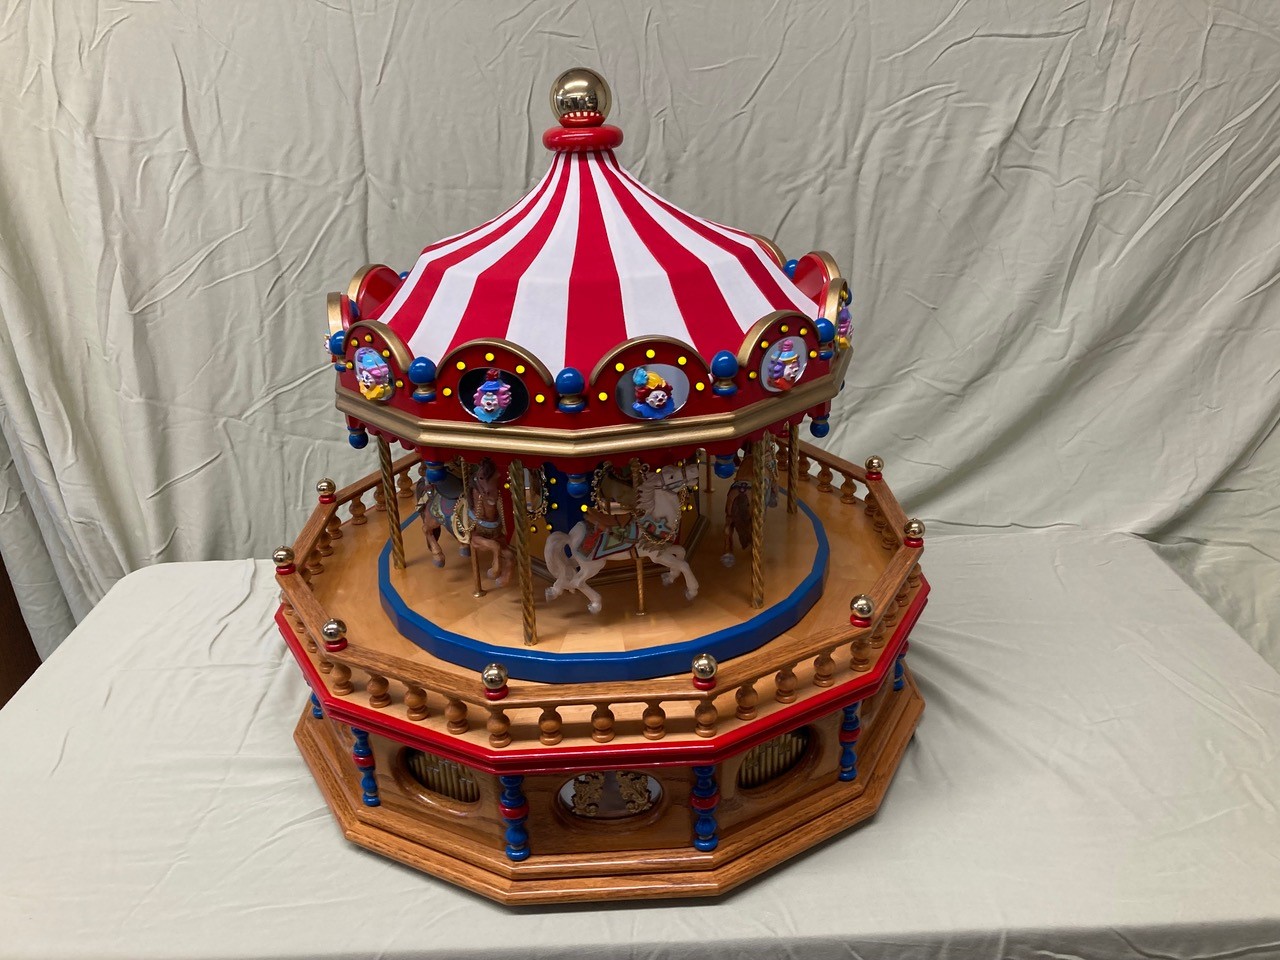 Don's first animated music box, "Carousel Waltz." 